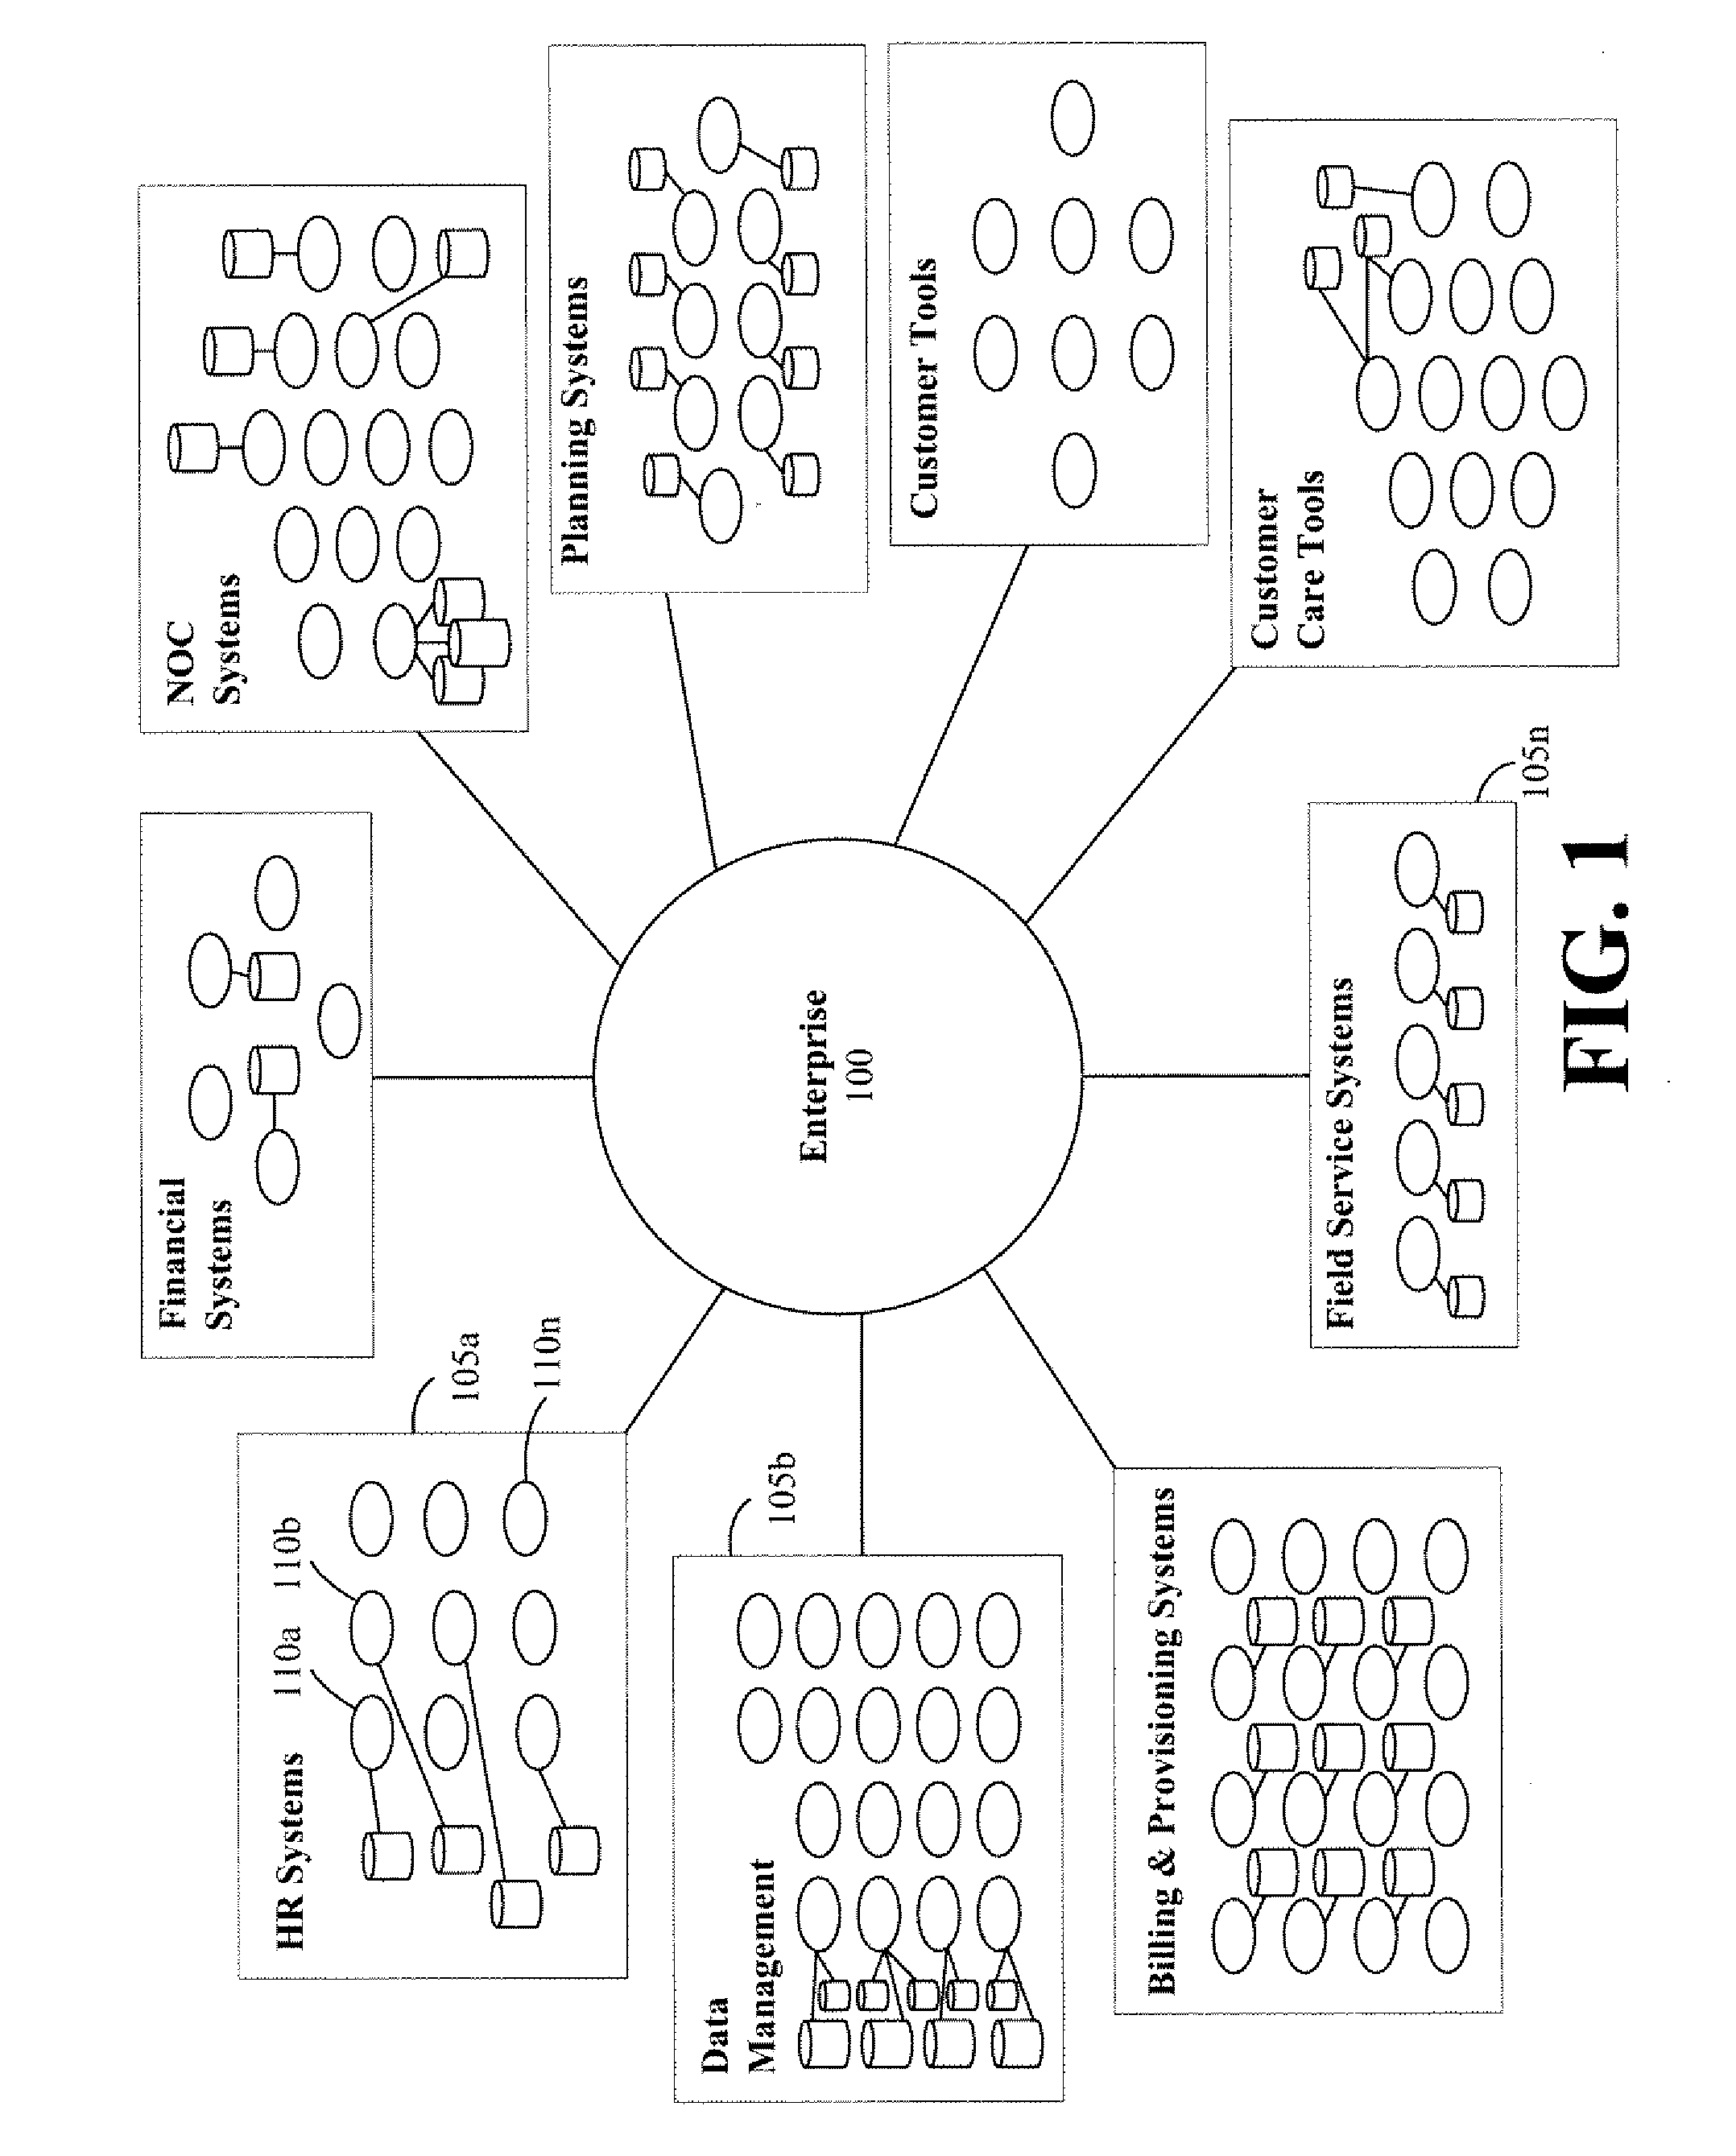 Systems and Methods for Facilitating Information Technology Assessments